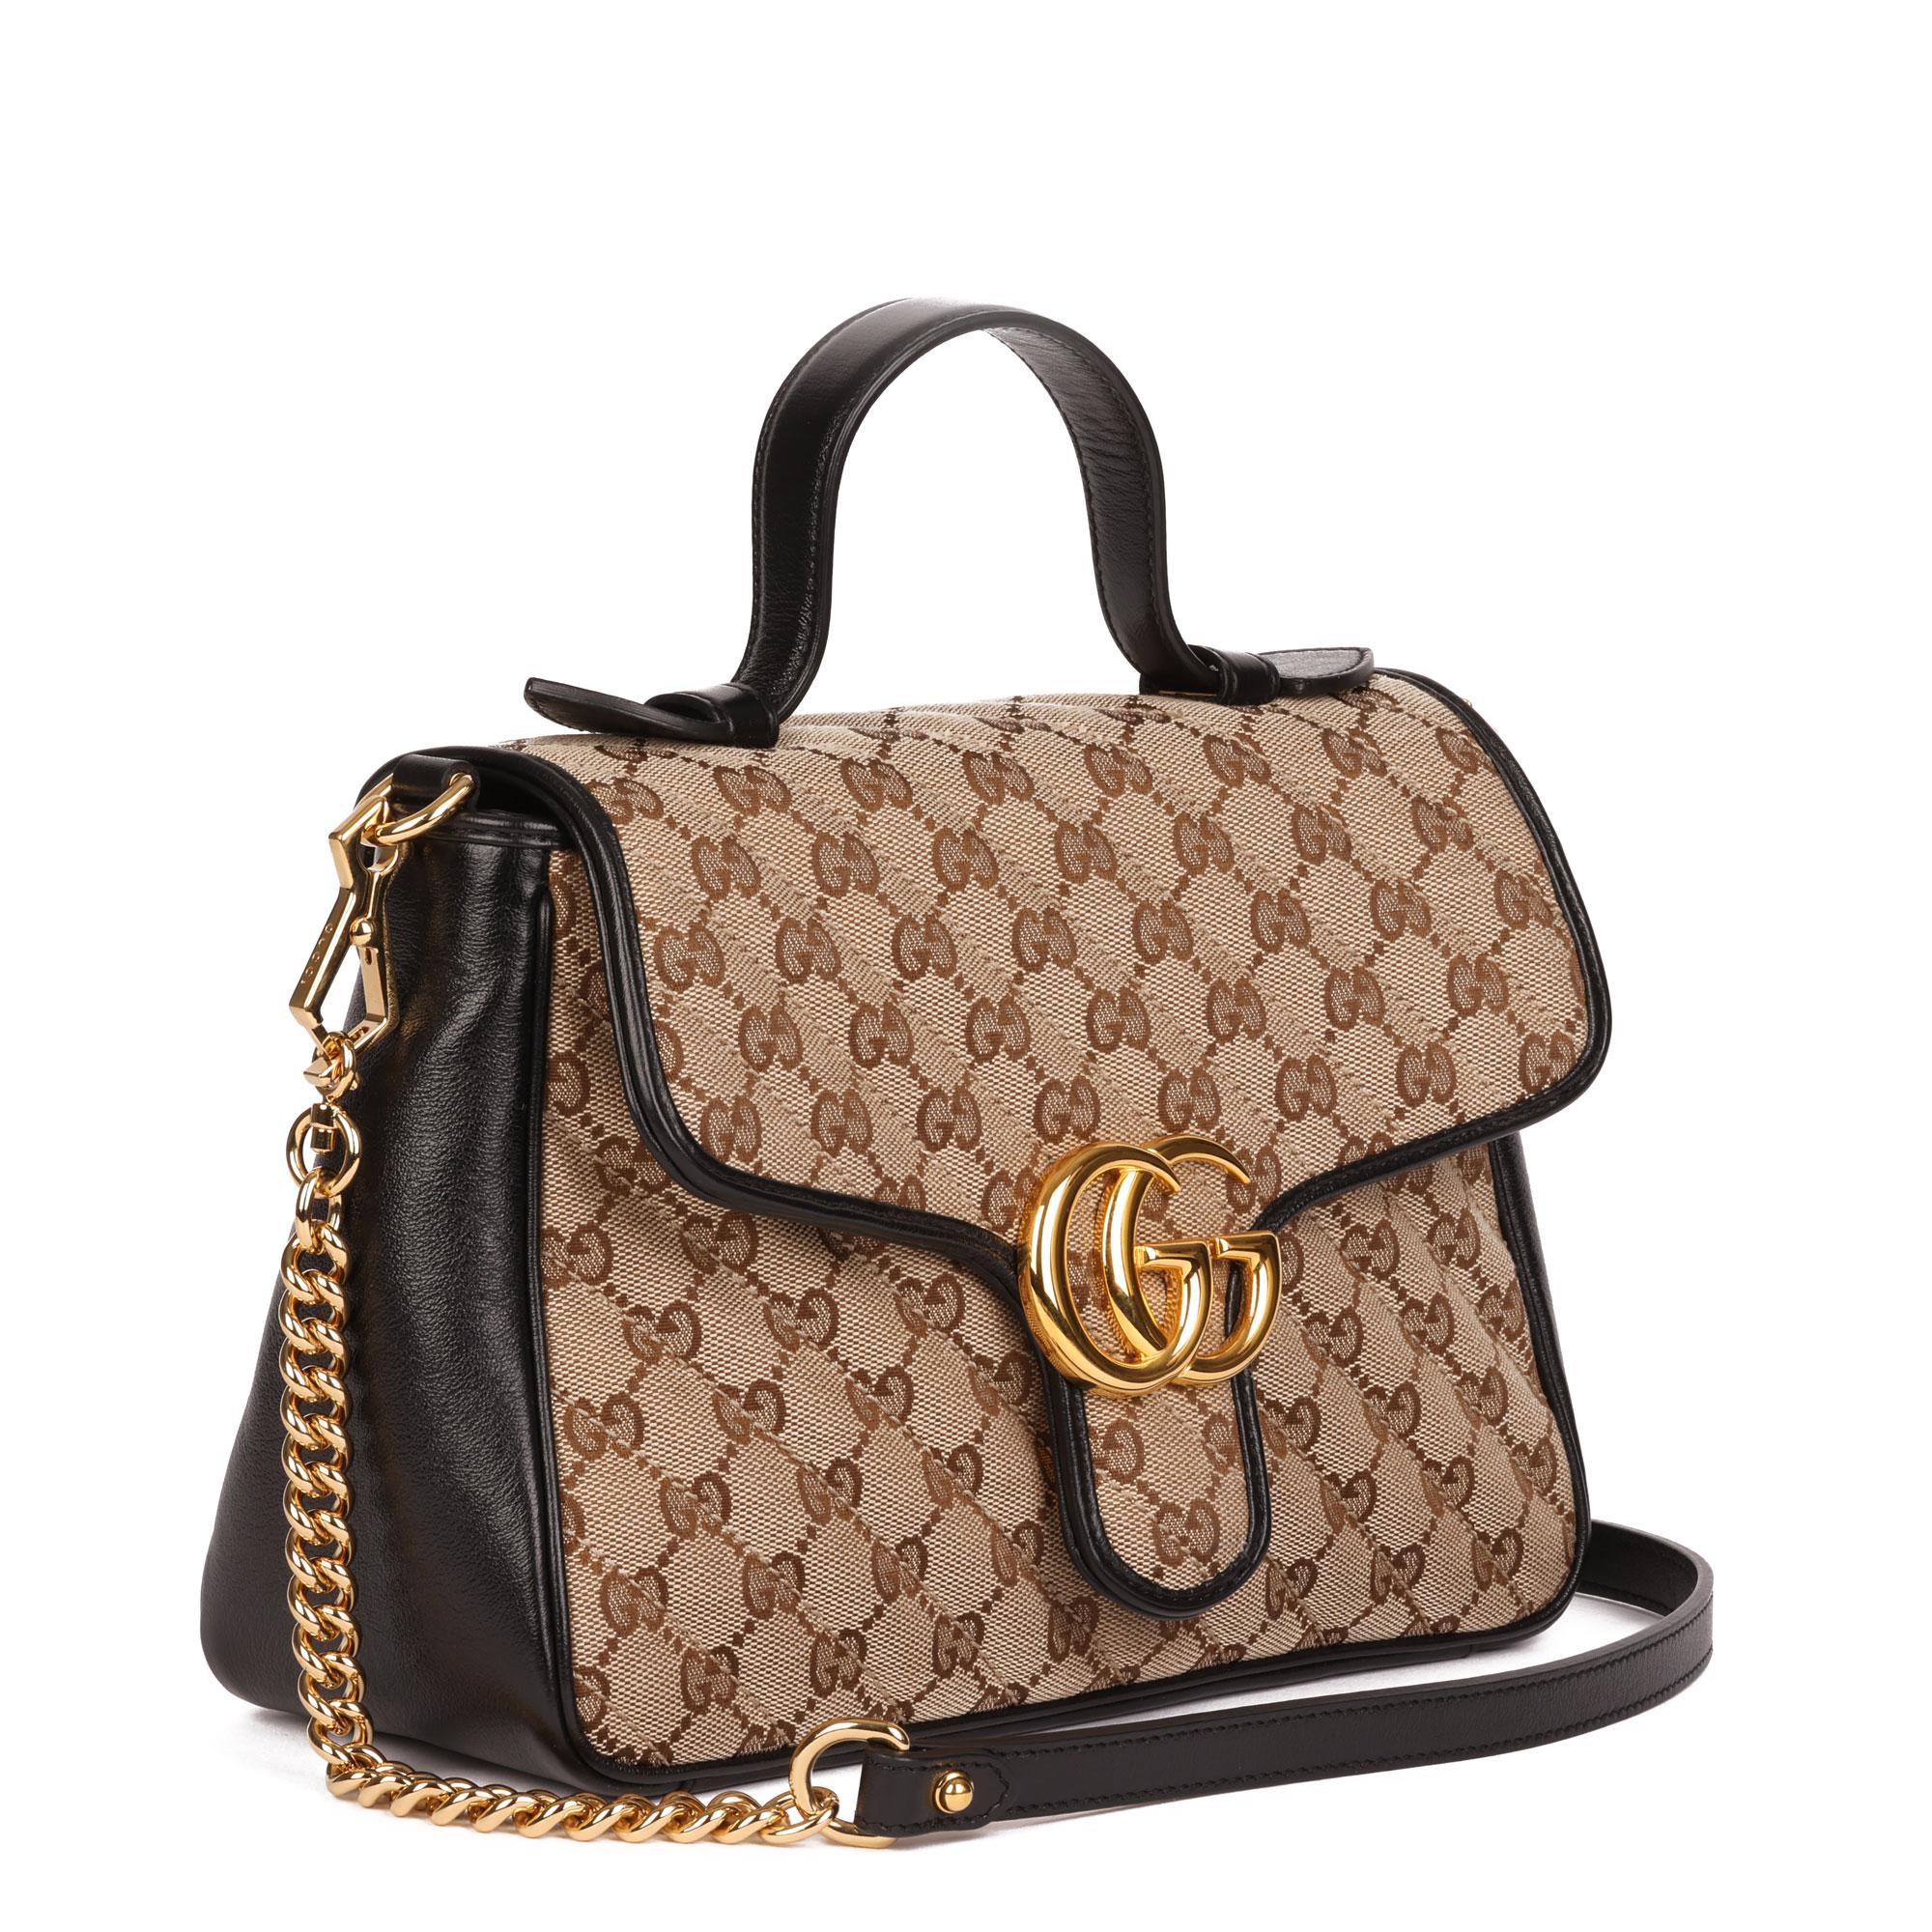 GUCCI
GG Supreme Canvas & Black Calfskin Leather Small Top Handle Marmont

Xupes Reference: HB4164
Serial Number: 498110 204991
Age (Circa): 2020
Accompanied By: Gucci Dust Bag, Shoulder Strap
Authenticity Details: Date Stamp (Made in Italy)
Gender: